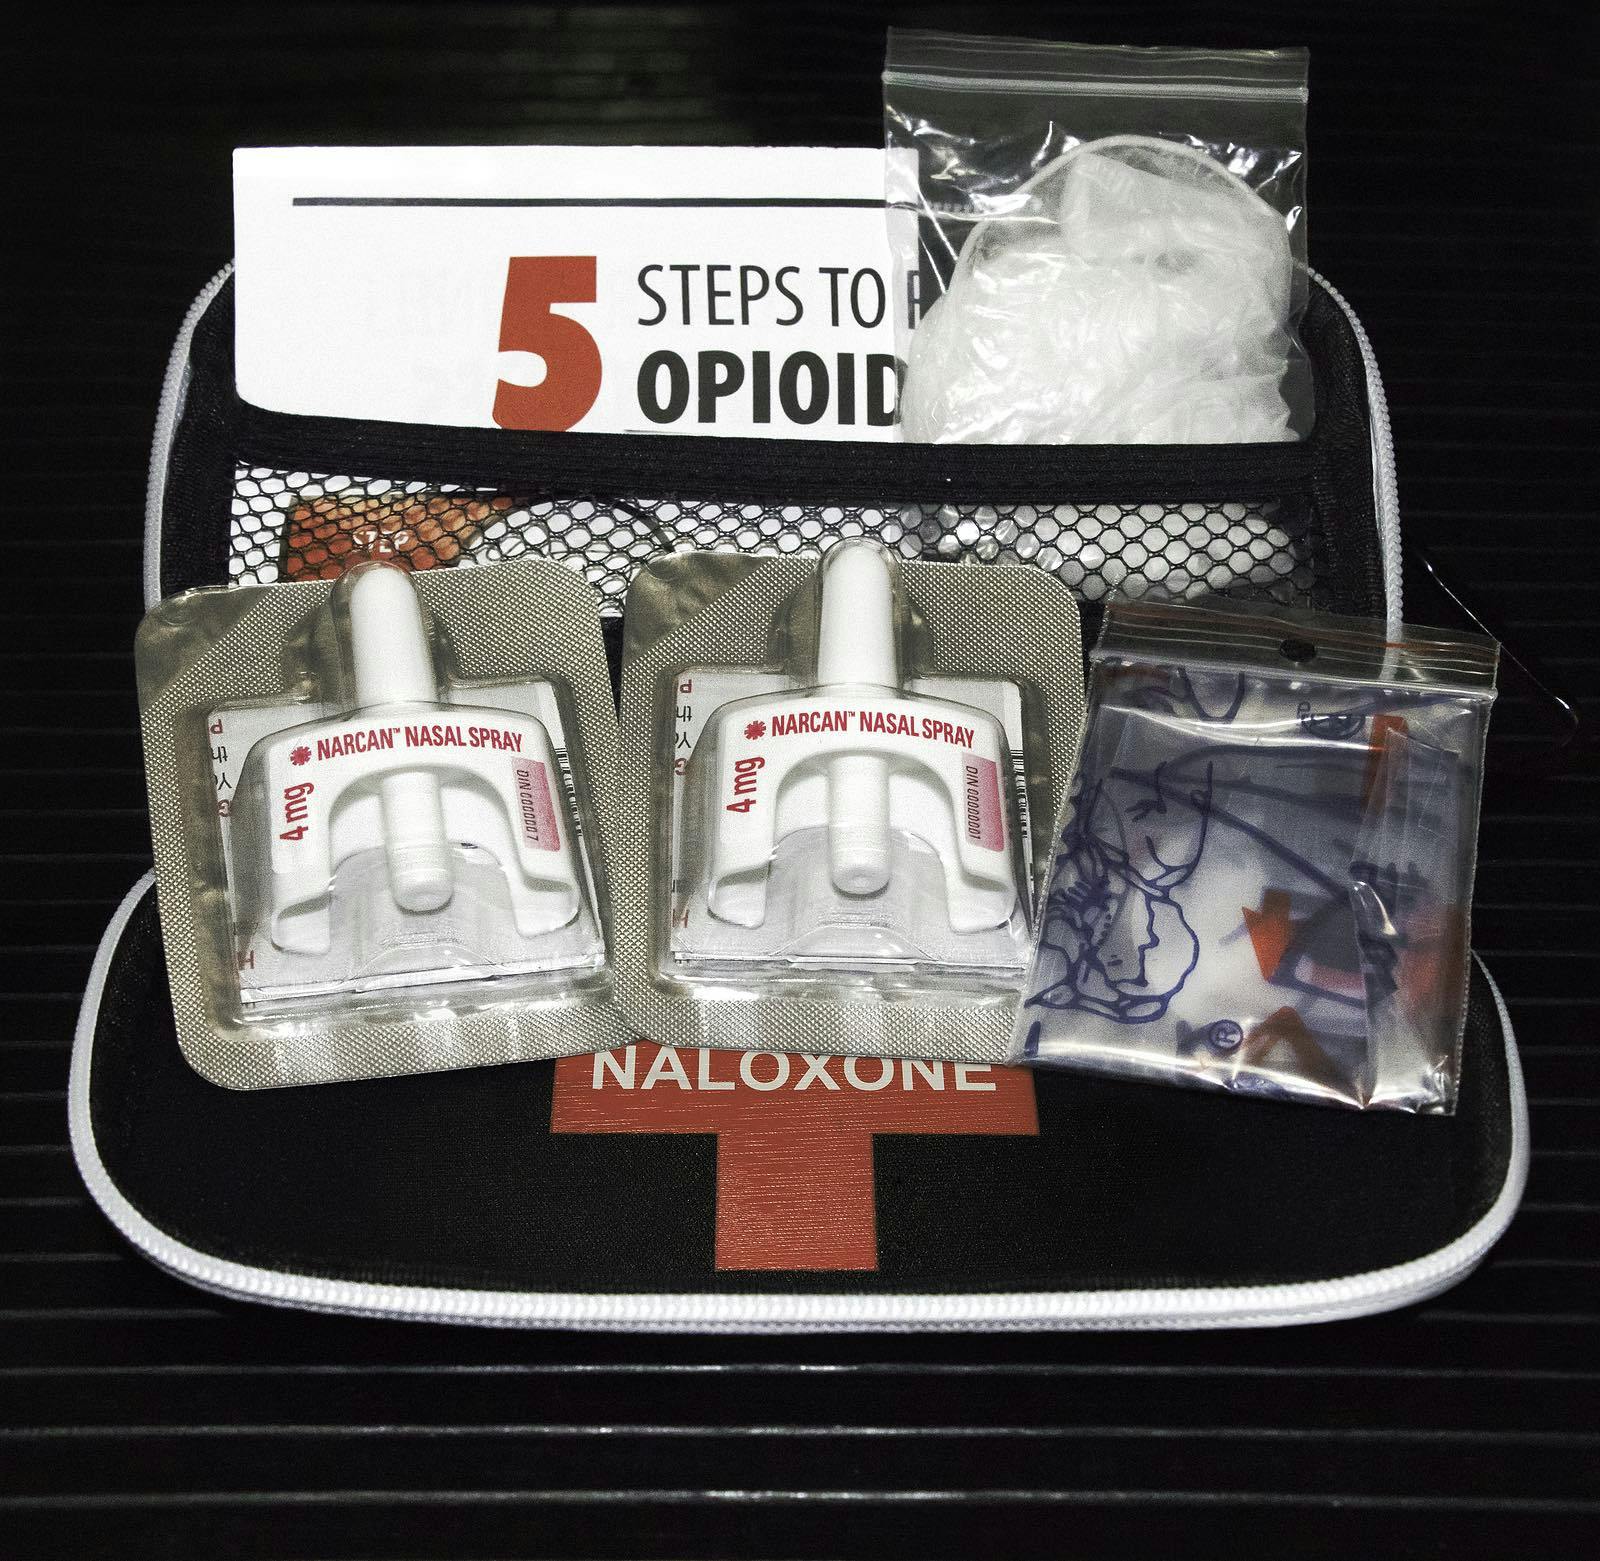 Tillsonburg, ON / Canada &#8211; July 1 2019 New Naloxone nasal delivery method of Narcan distributed by healthcare professionals to help combat opioid crisis and reverse the effects of opioid overdose.
